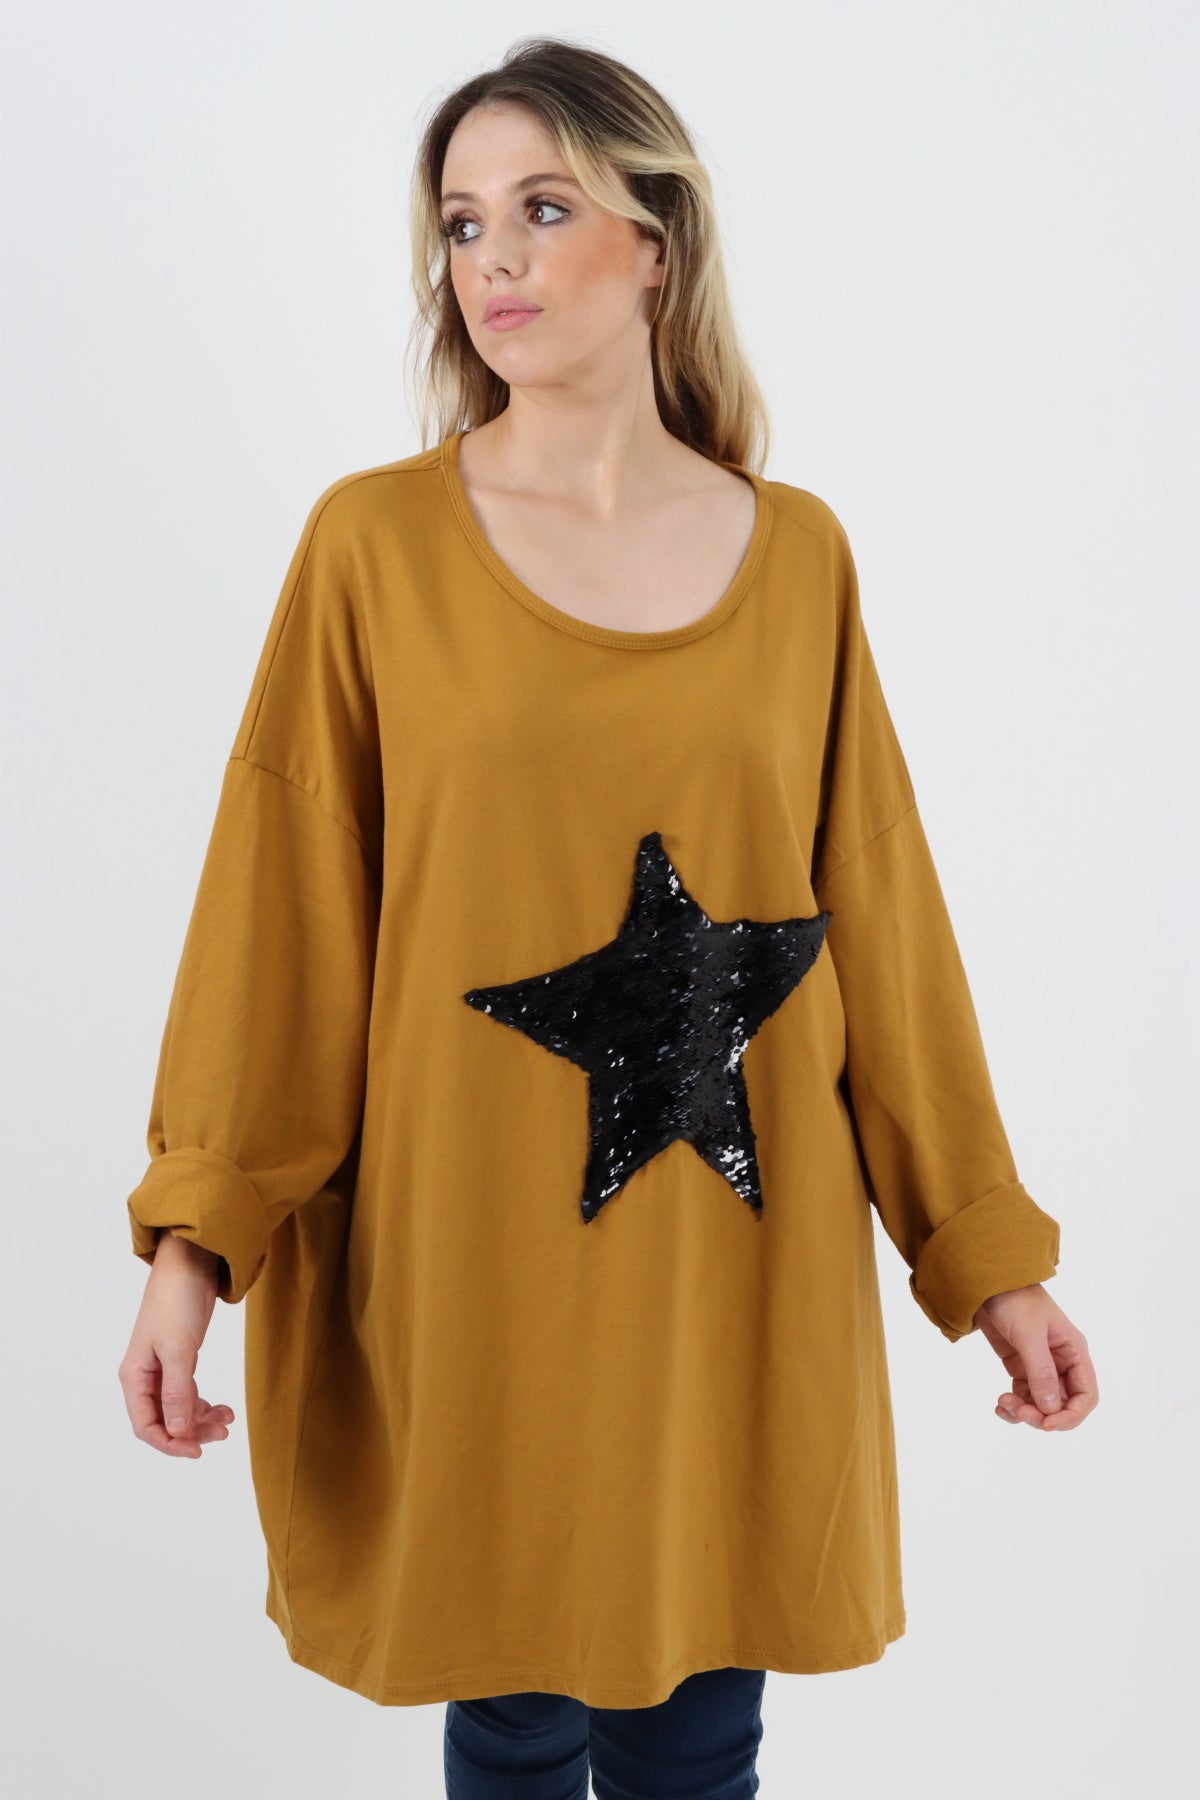 Made In Italy Sequin Star Oversized Top